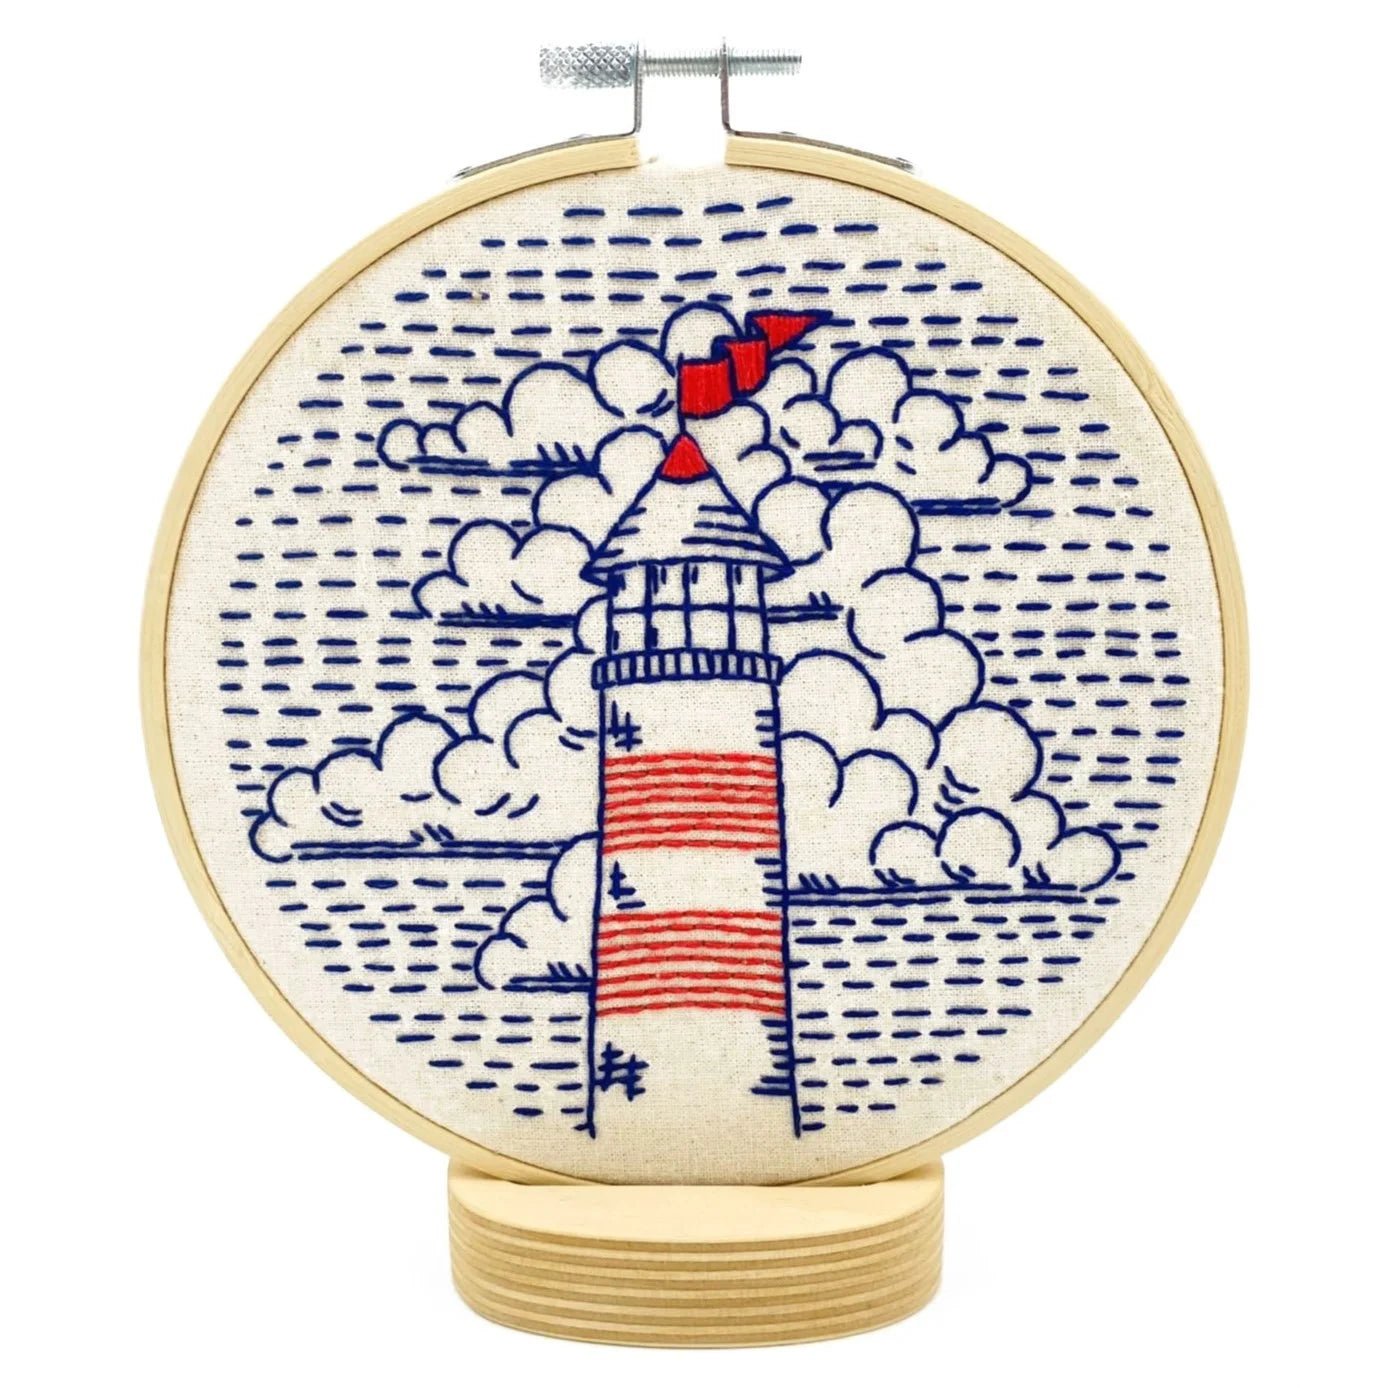 Lighthouse Complete Embroidery Kit - Hook, Line, & Tinker Embroidery Kits - The Little Yarn Store